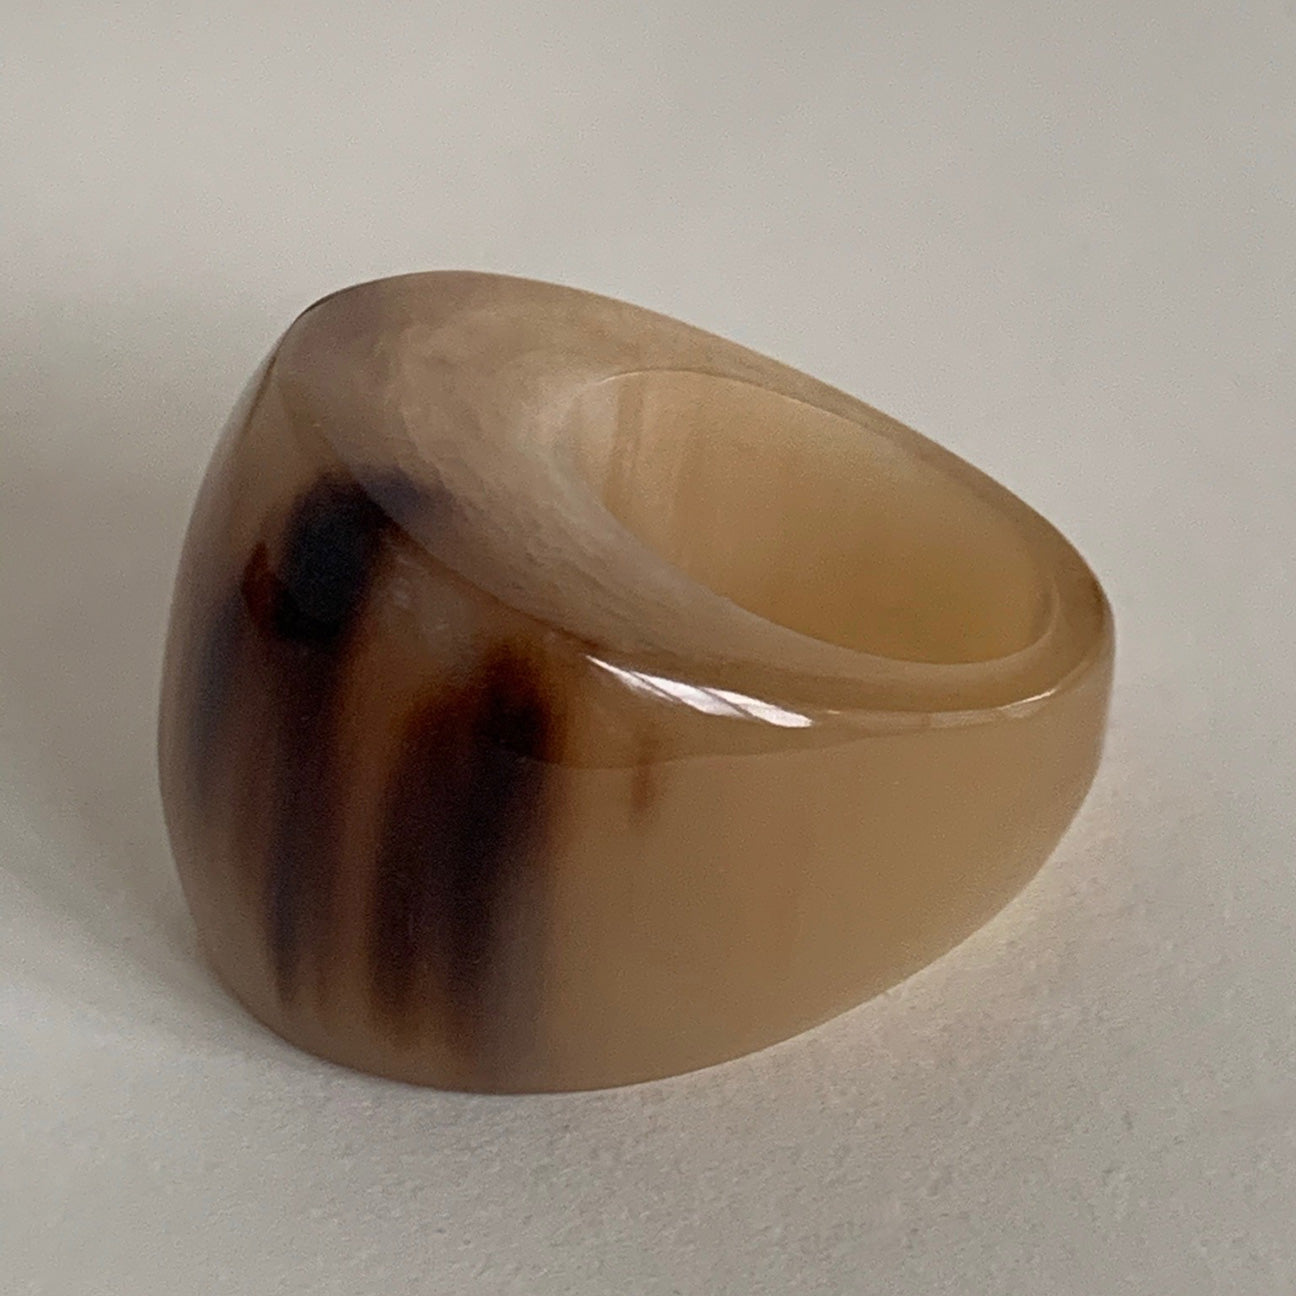 M+A NYC Horn Cocktail Ring in Milk Caramel